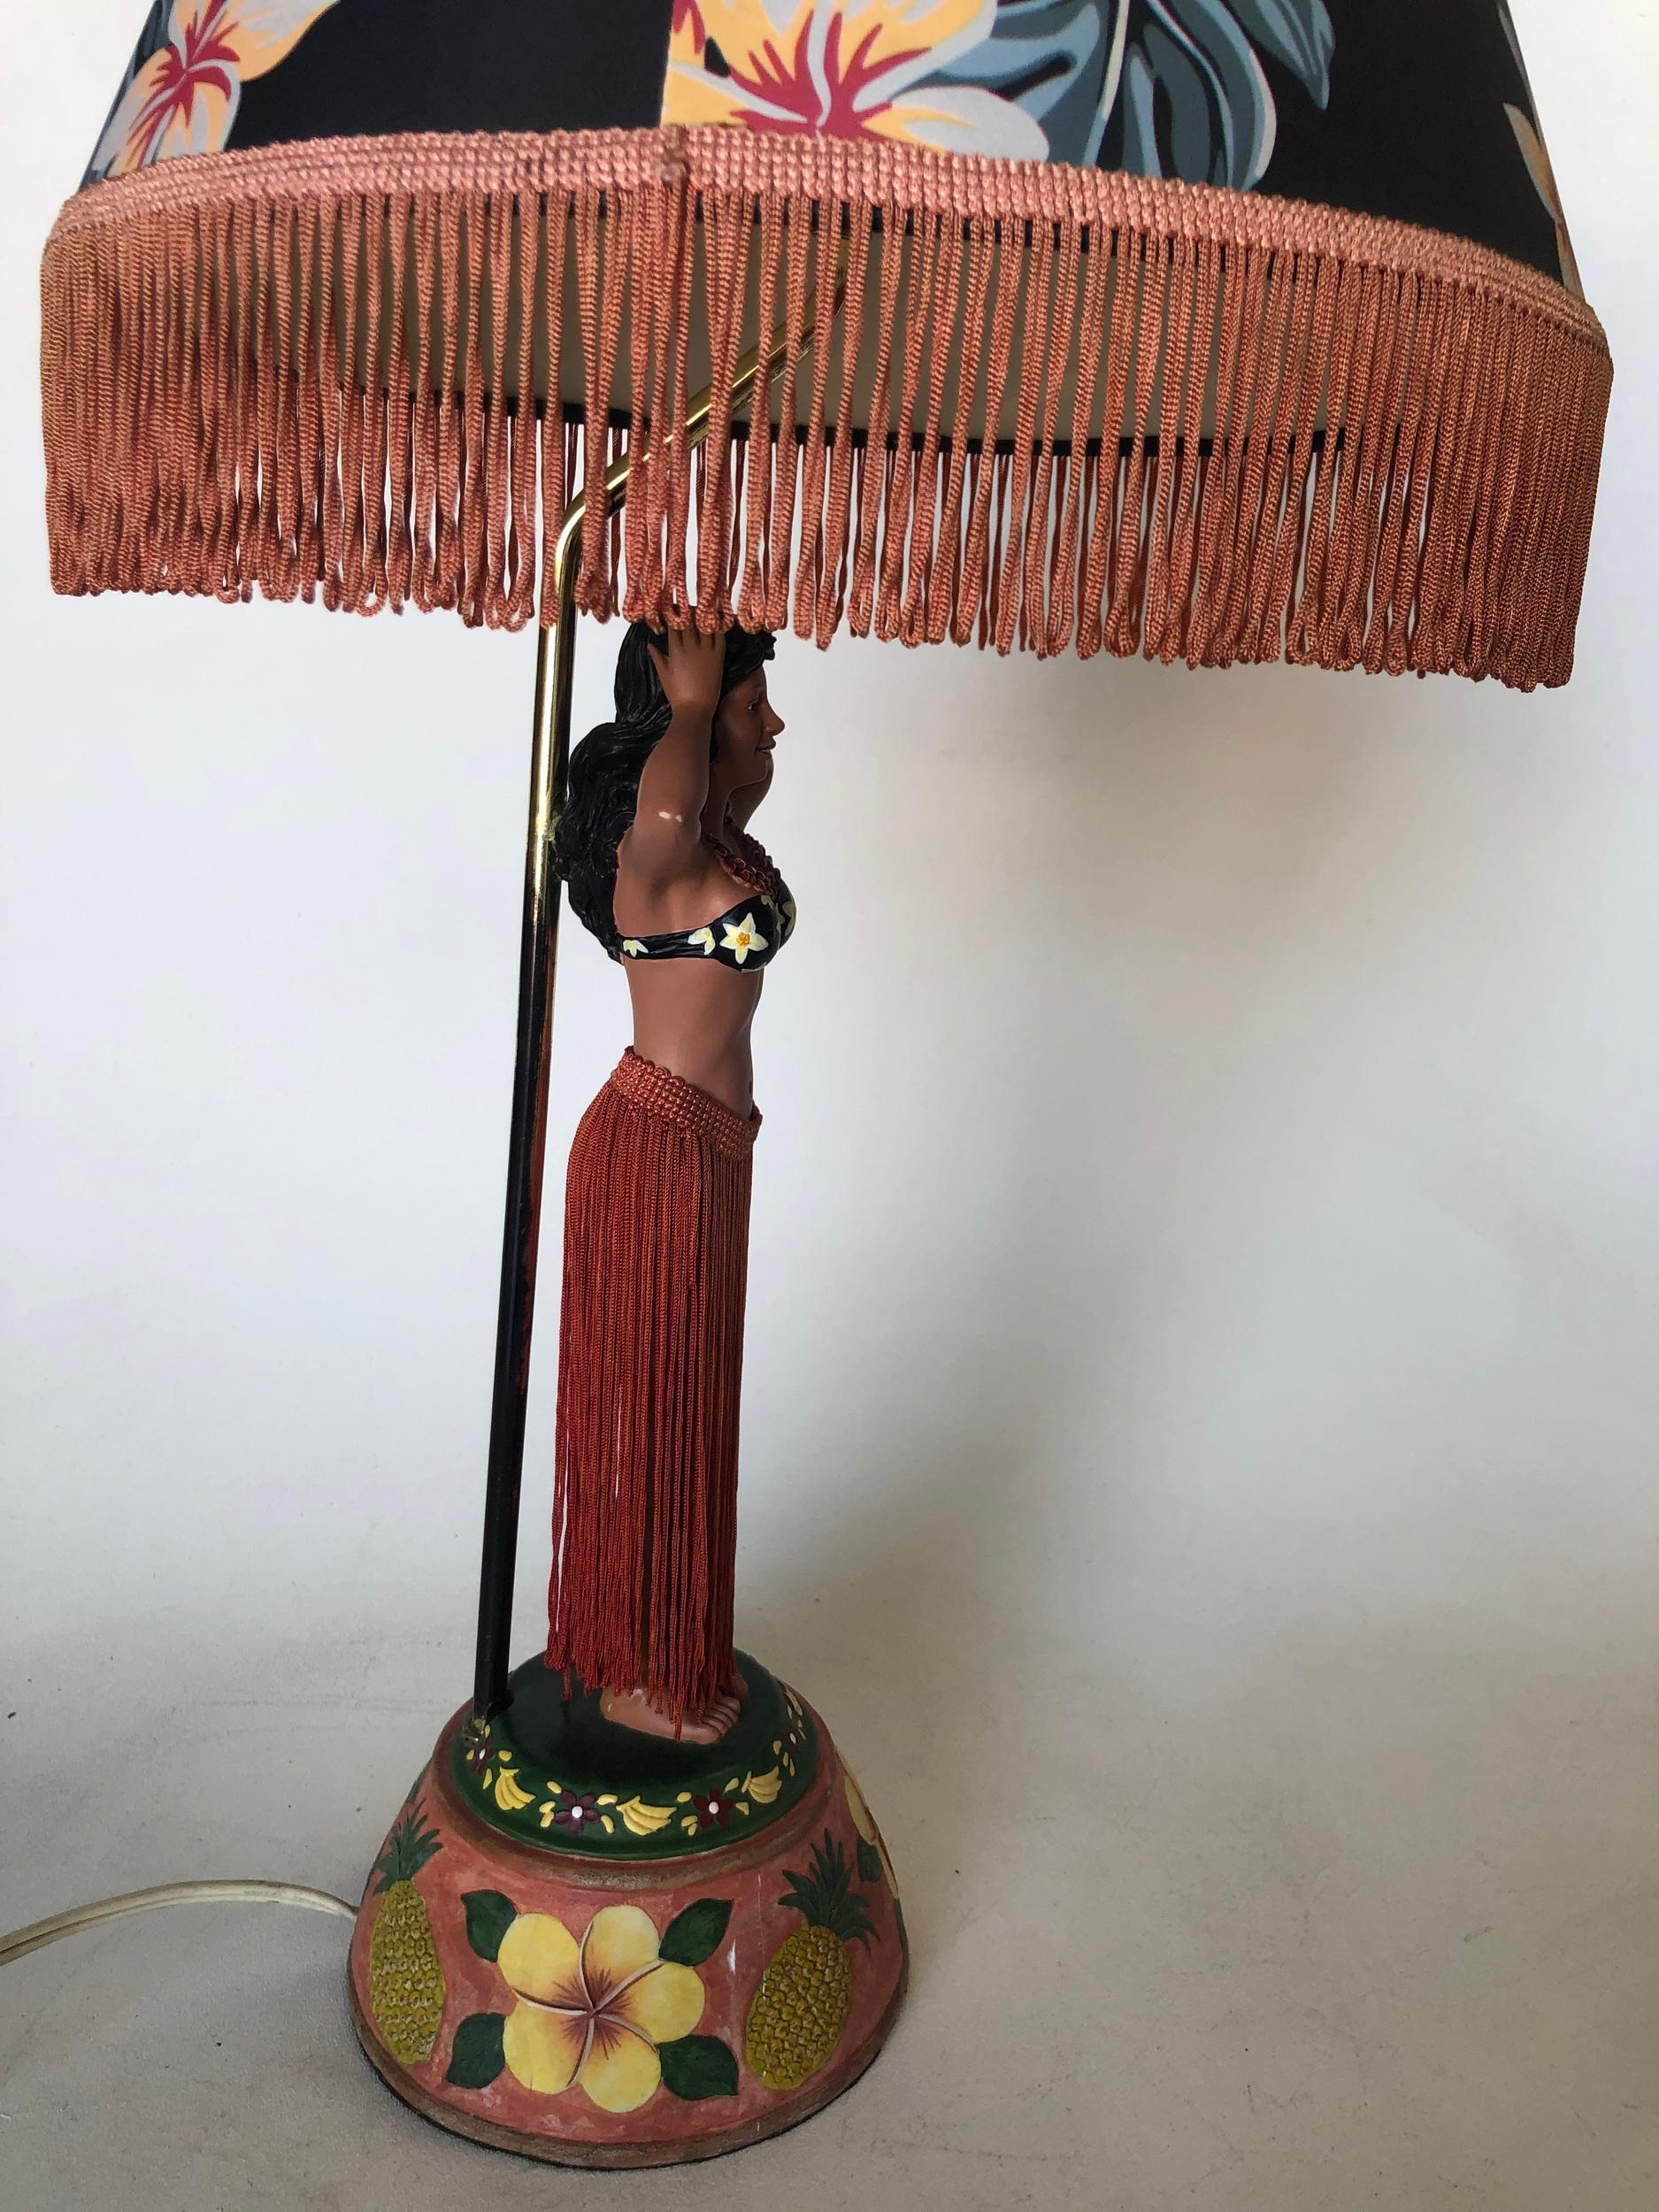 Pair of Hula Girl Resin Table Lamp with Floral Fringe Lamp Shades 2